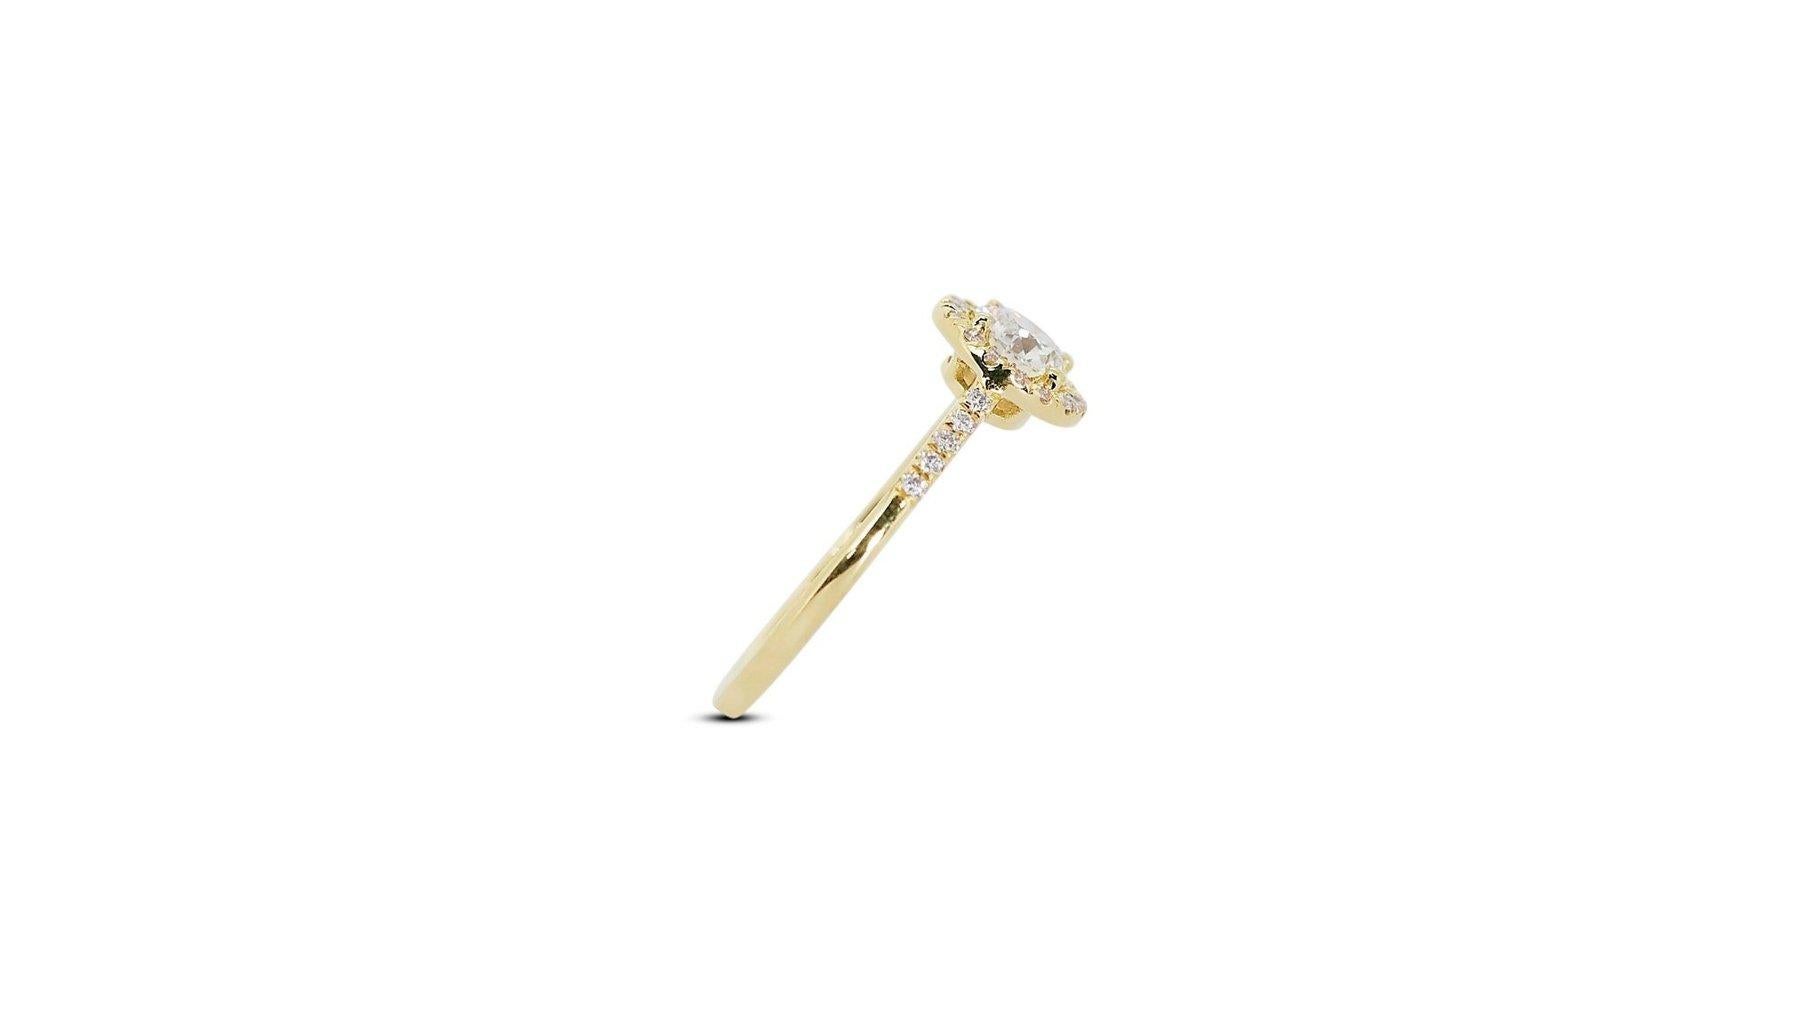 Captivating 18k Yellow Gold Natural Diamond Halo Ring w/1.21 ct- GIA Certified For Sale 2